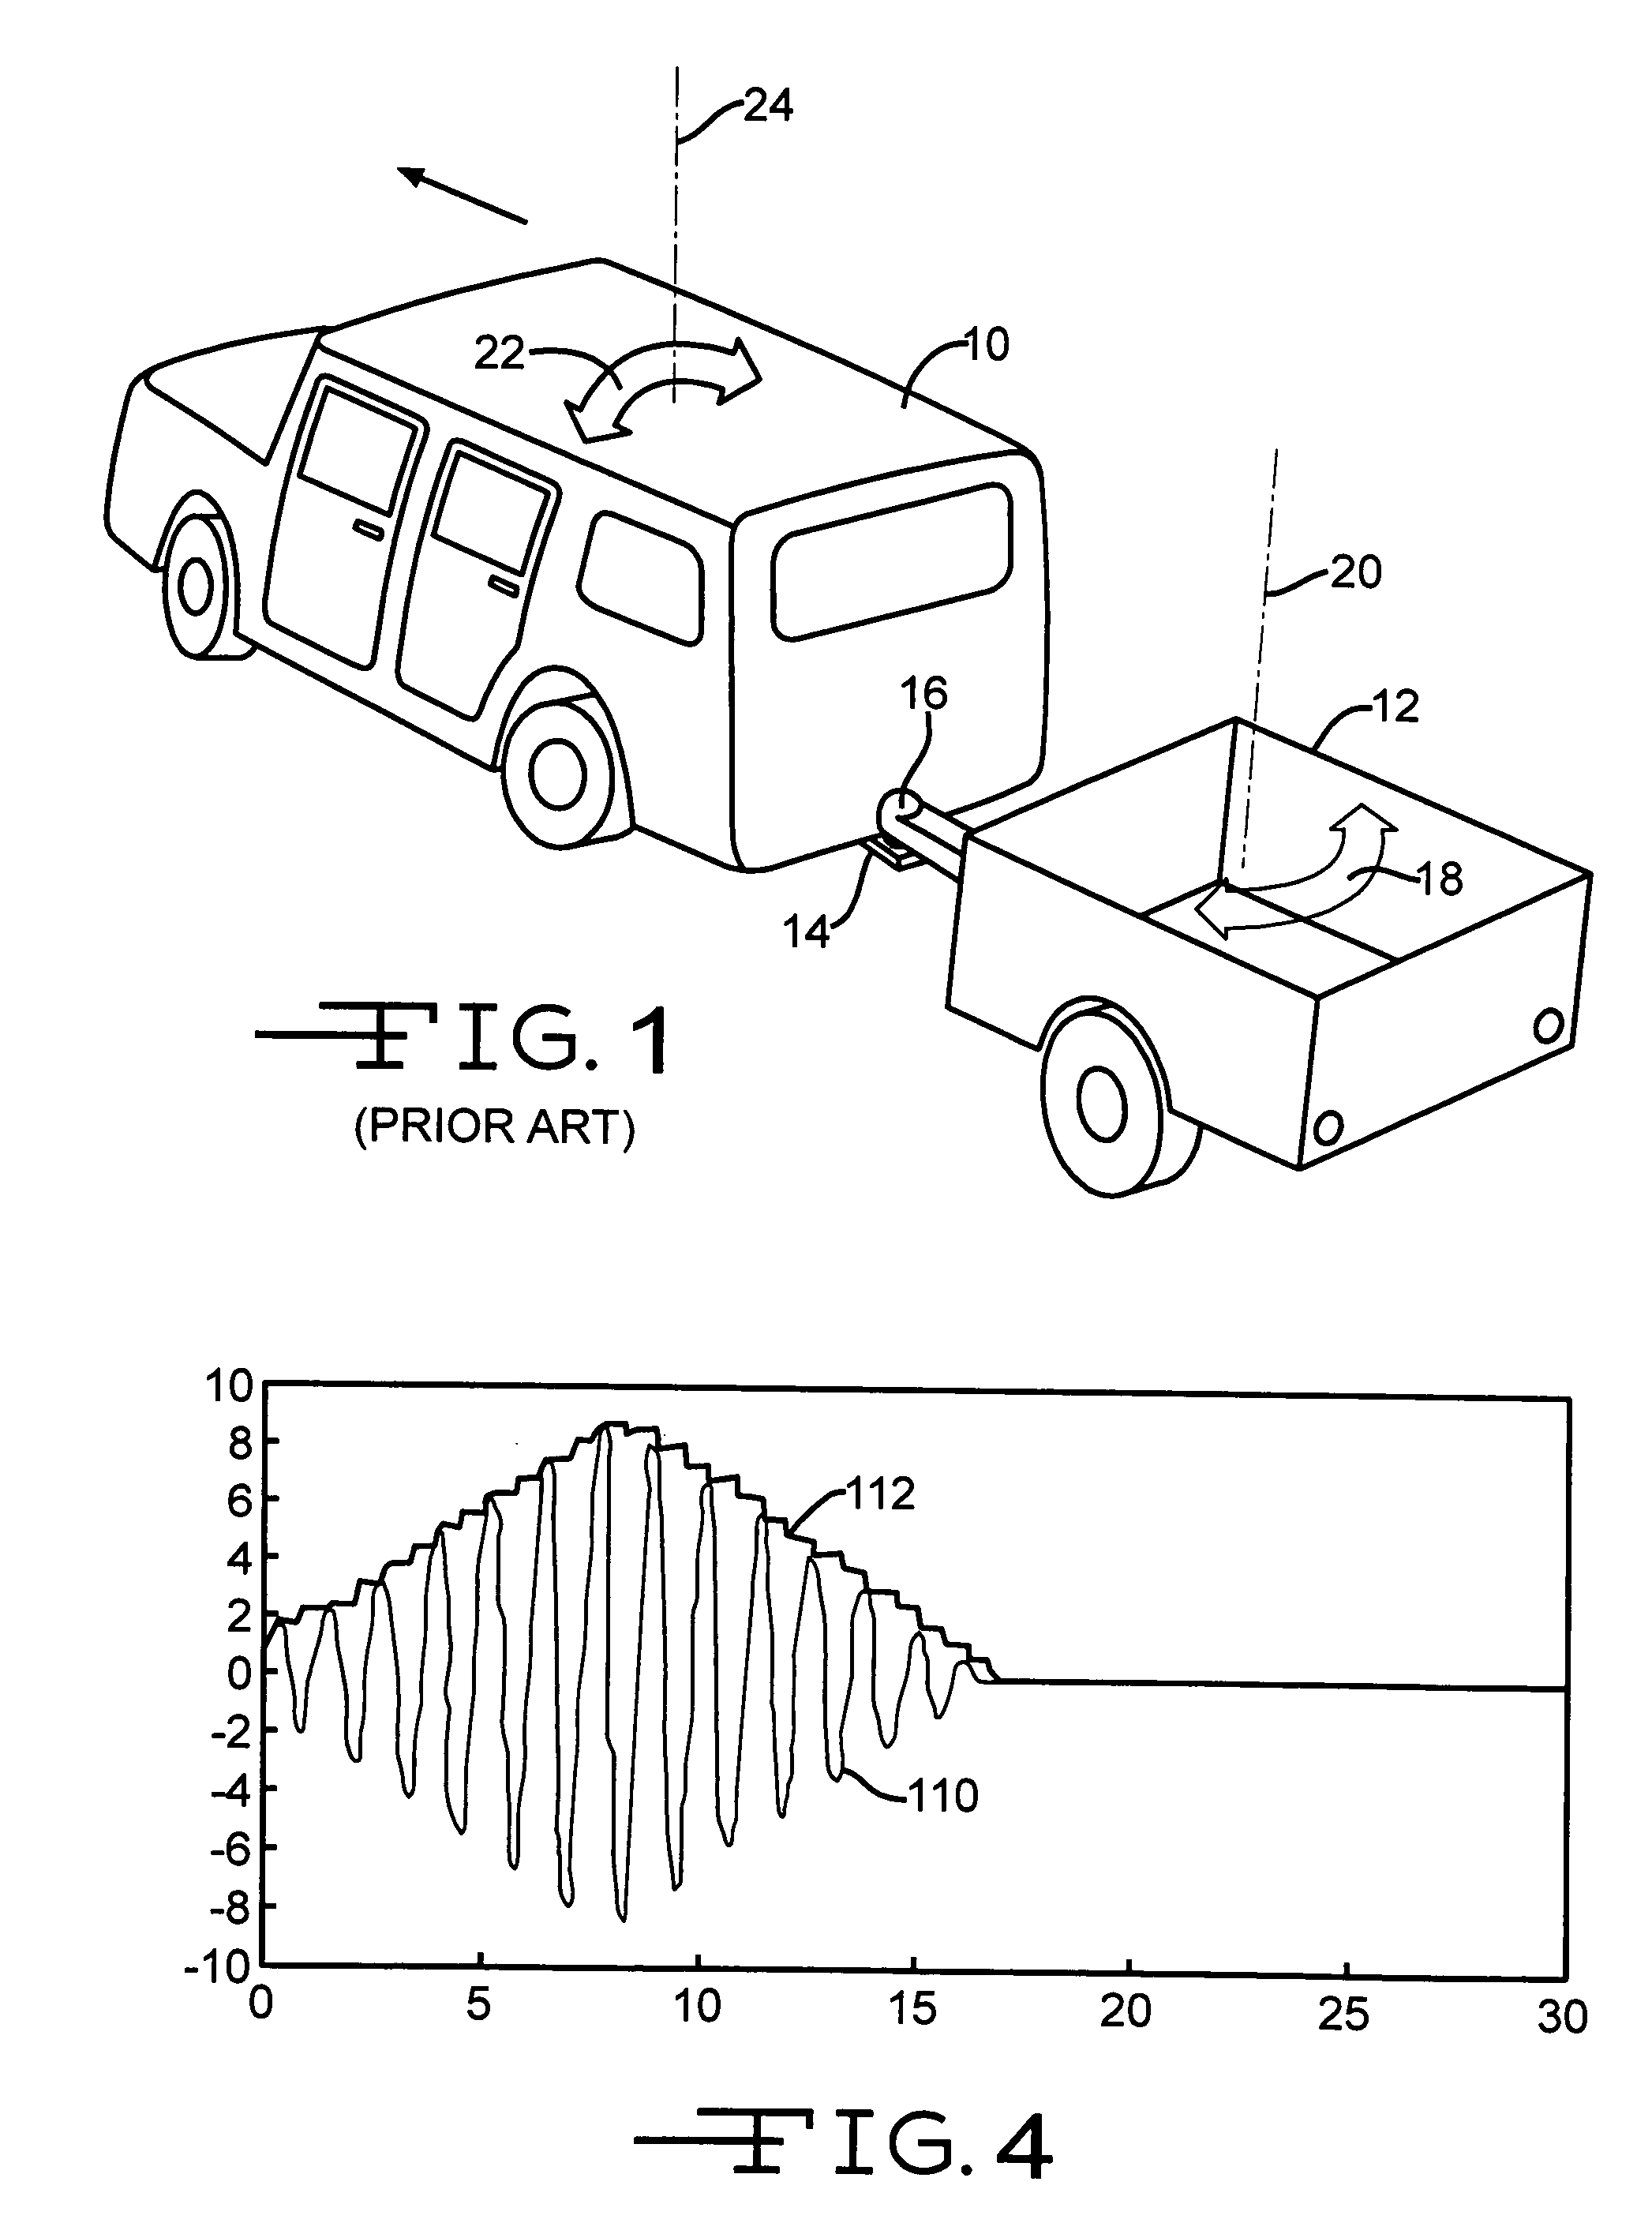 Method and apparatus for detecting and correcting trailer induced yaw movements in a towing vehicle